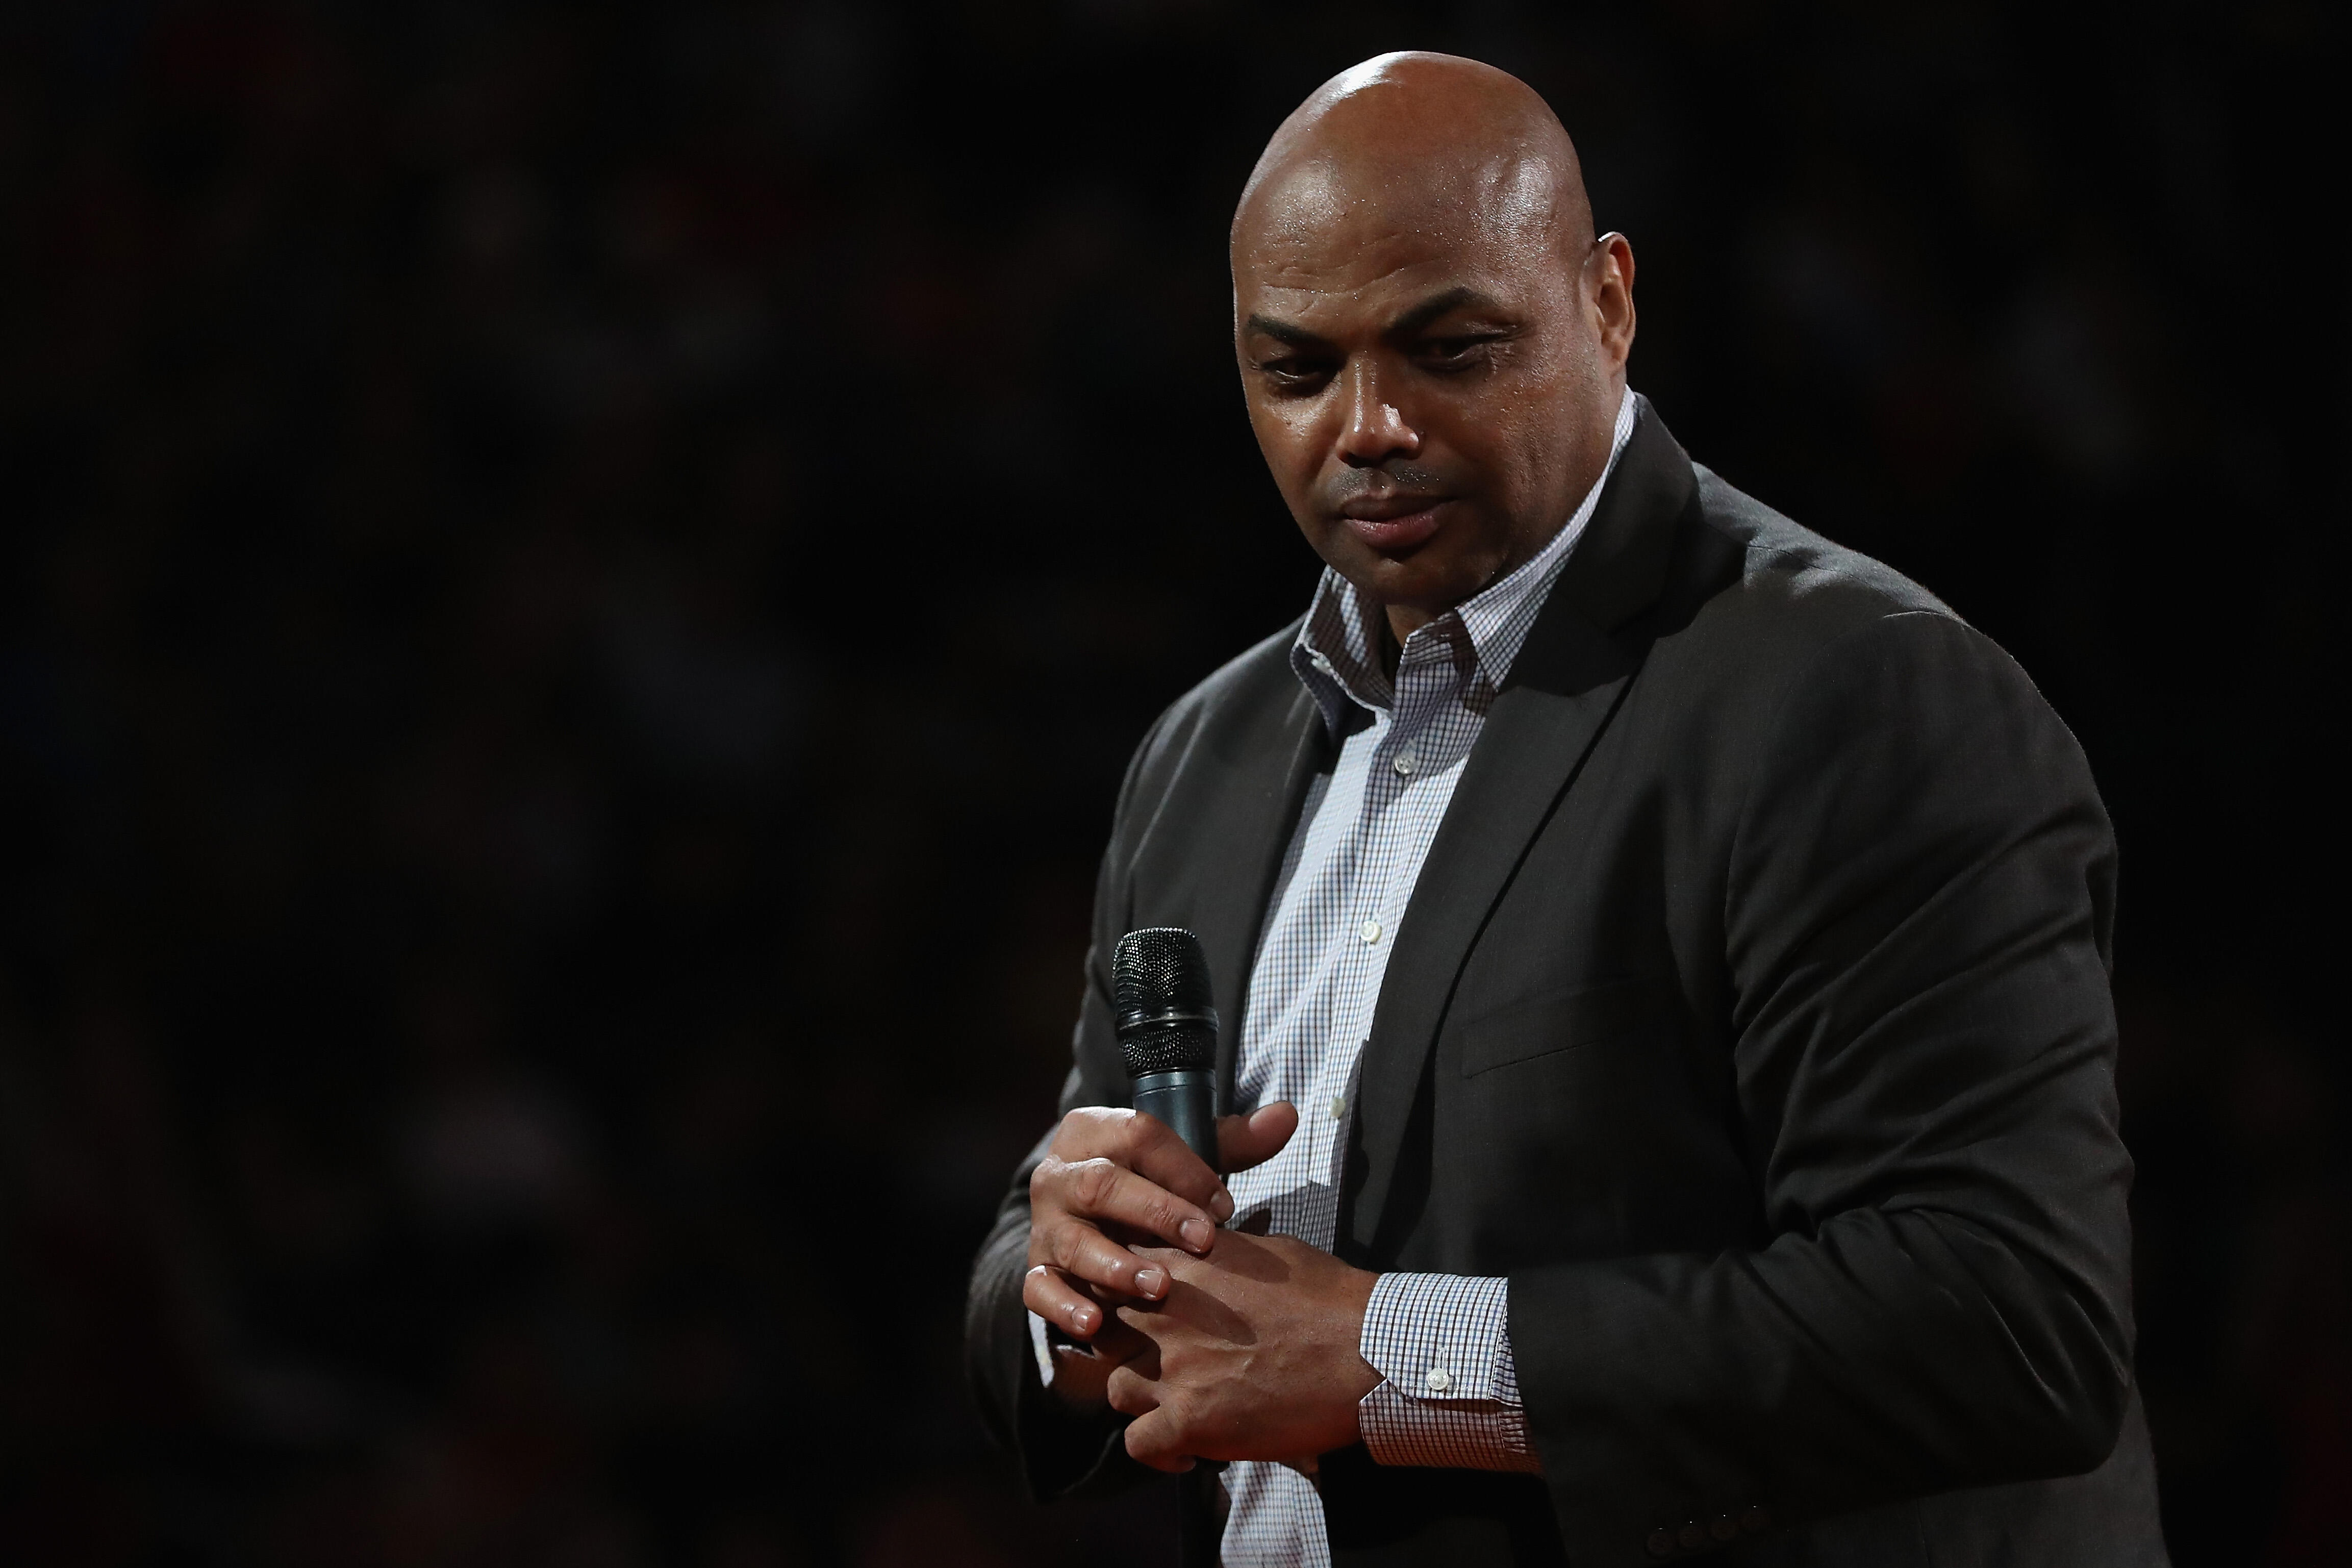 PHOENIX, AZ - MARCH 03:  NBA legend Charles Barkley speaks during half time of the NBA game between the Oklahoma City Thunder and the Phoenix Suns at Talking Stick Resort Arena on March 3, 2017 in Phoenix, Arizona. NOTE TO USER: User expressly acknowledge